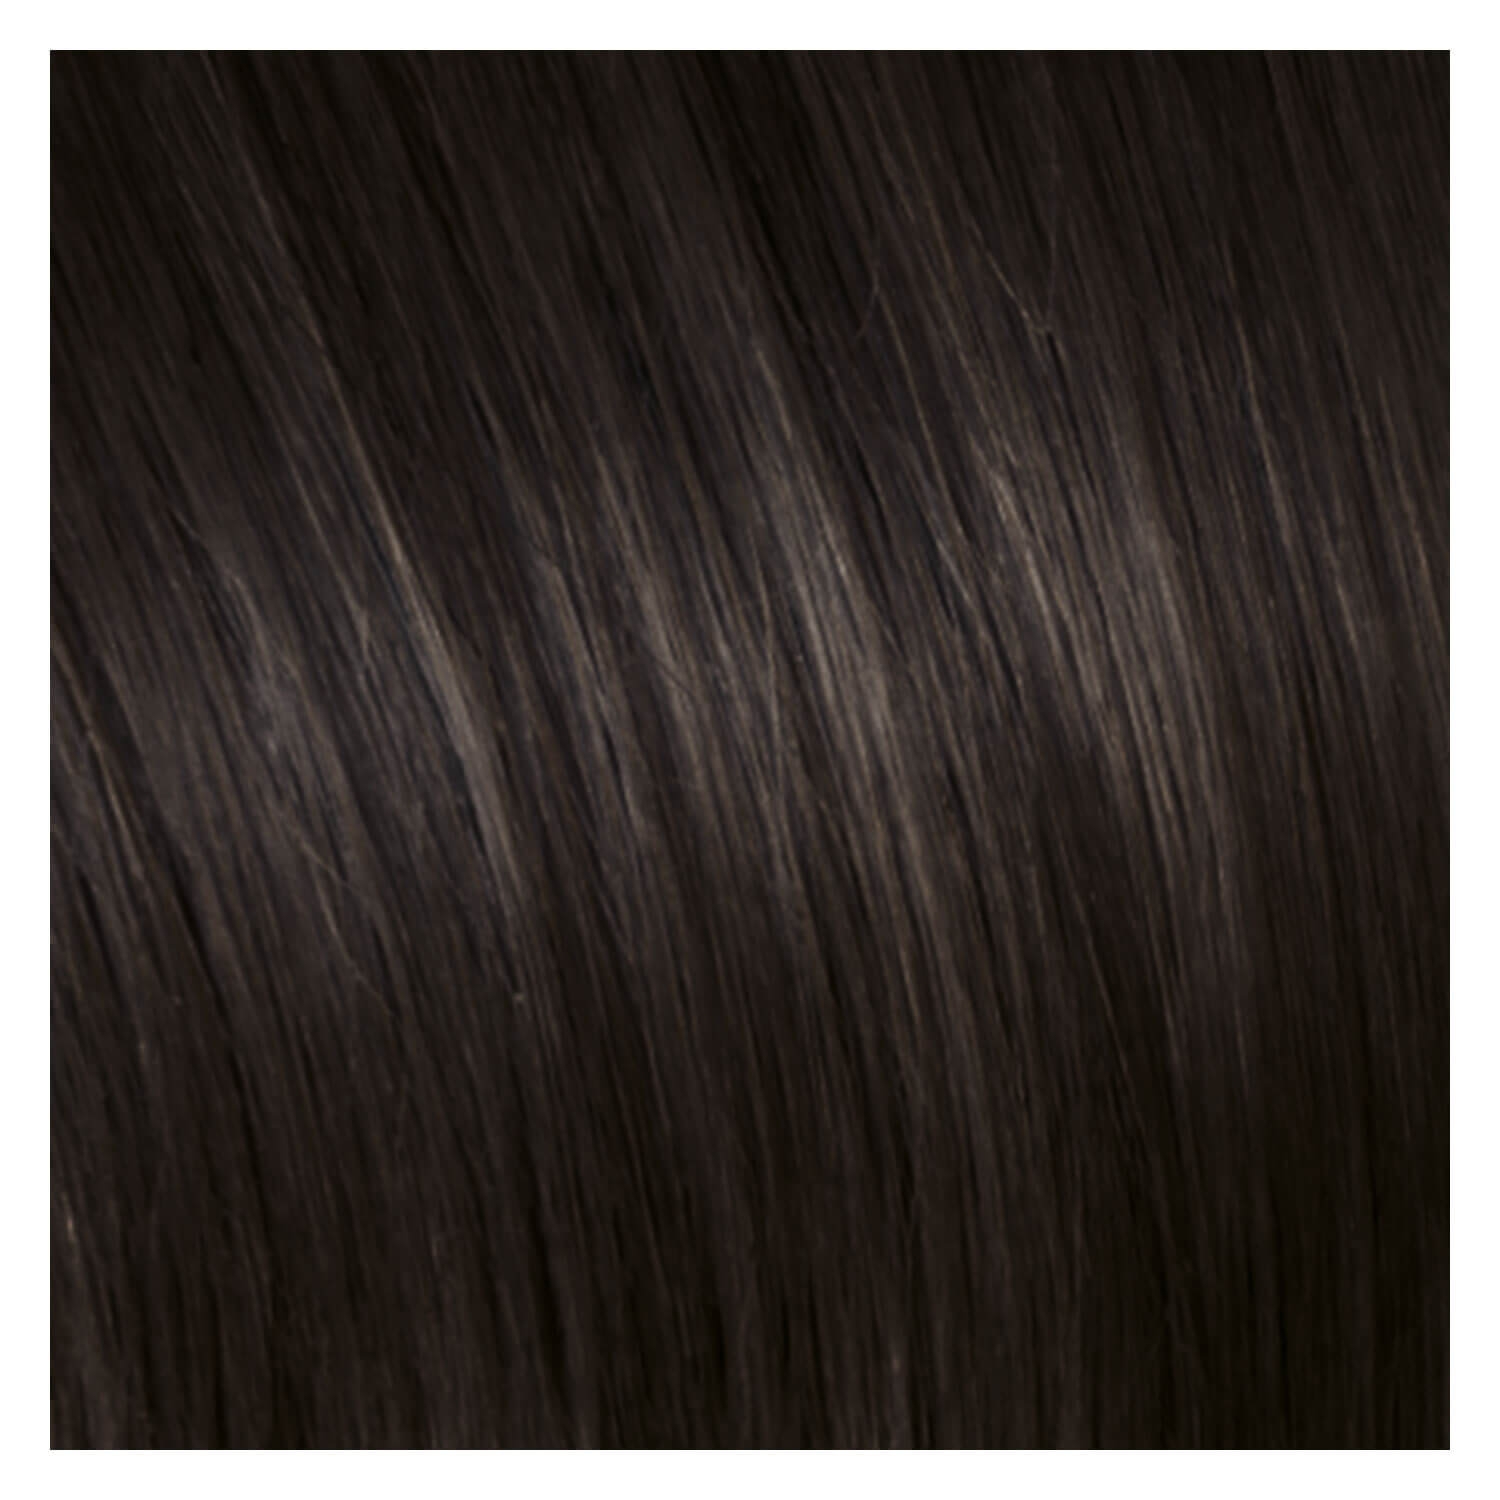 Product image from SHE Bonding-System Hair Extensions Wavy - 4 Kastanienbraun 55/60cm